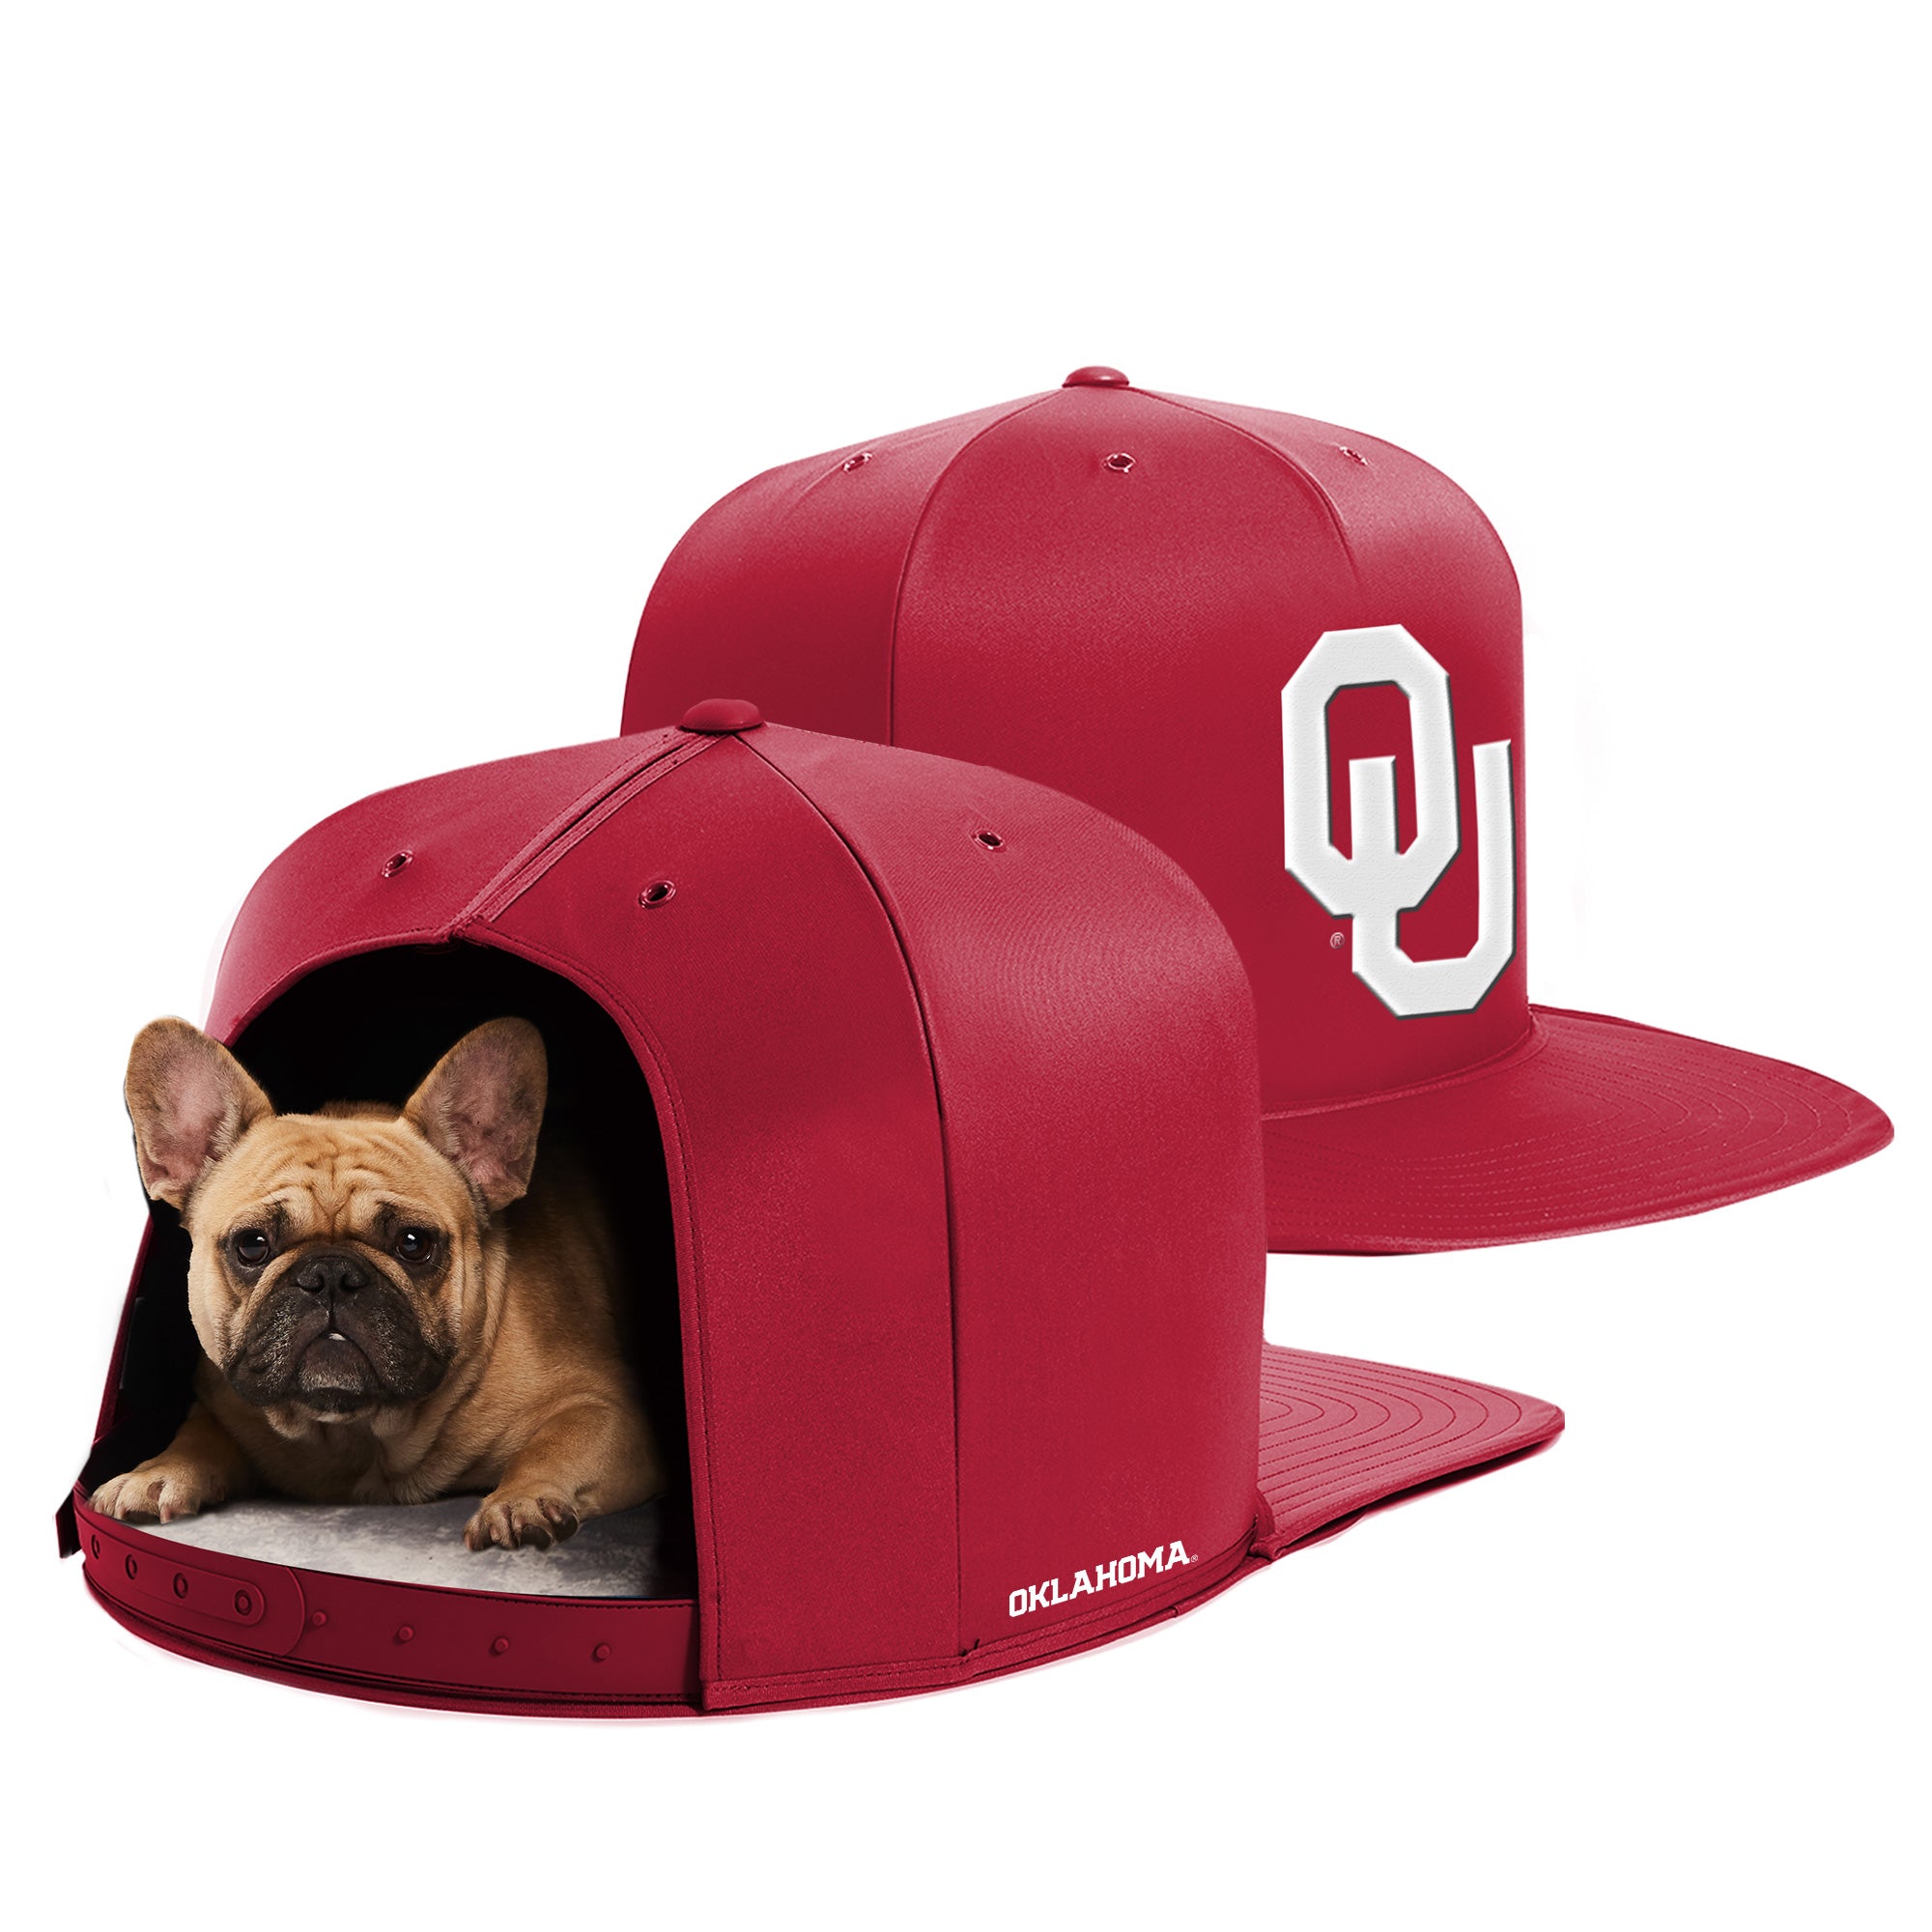 are dogs allowed at university of oklahoma